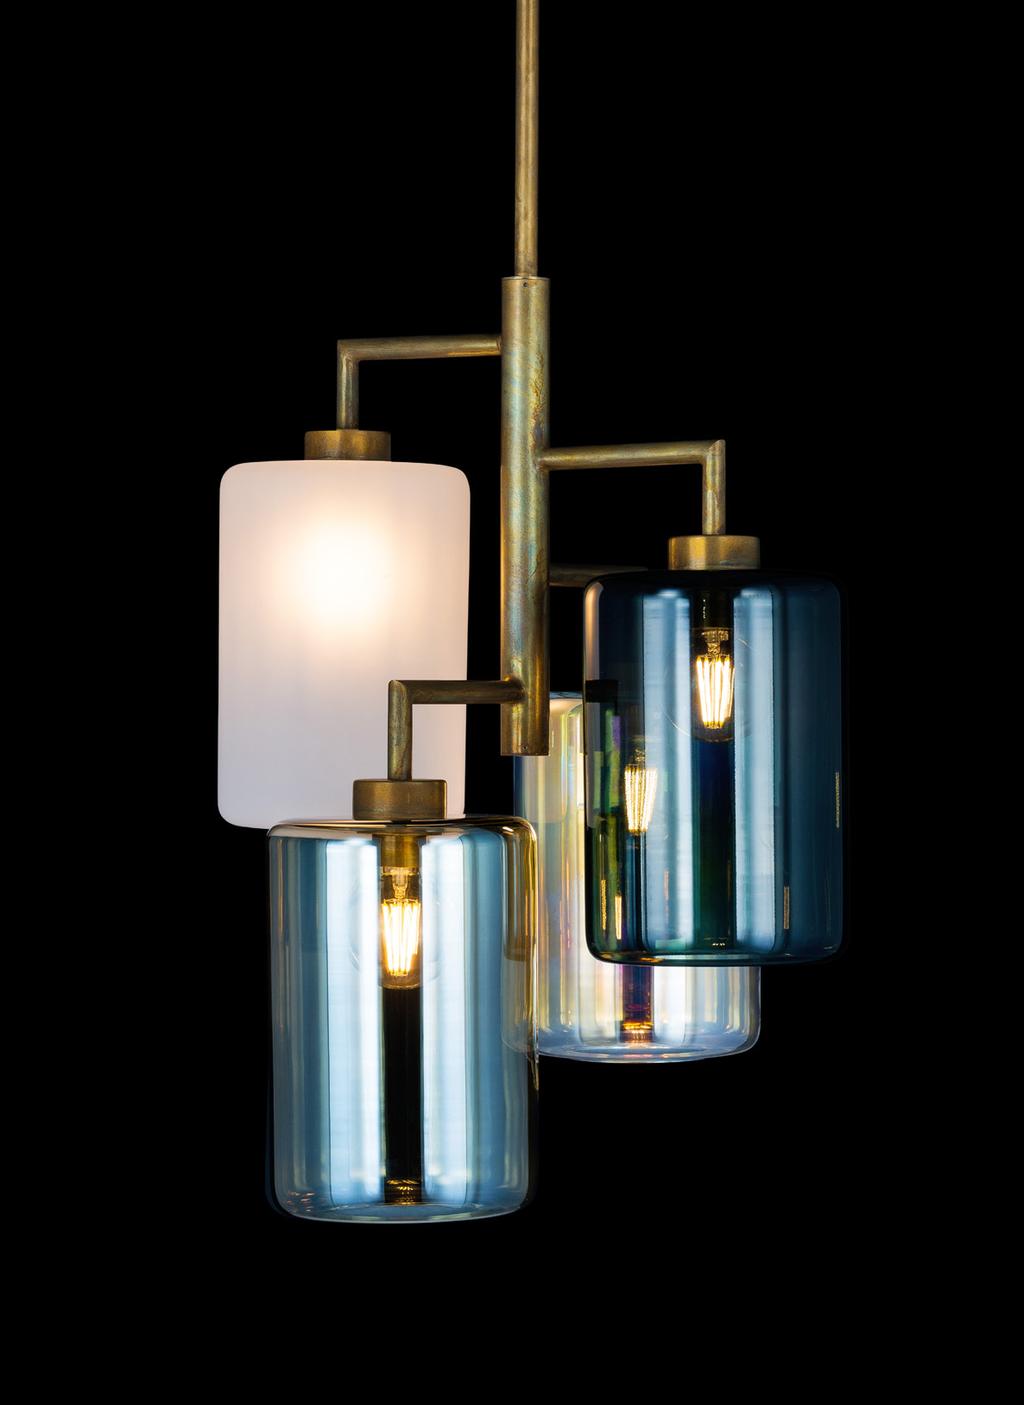 LO4BRBUR - STANDARD Standard Louise hanging lamp in brass burnished finish with a bronze, clear satin, grey and iridescent